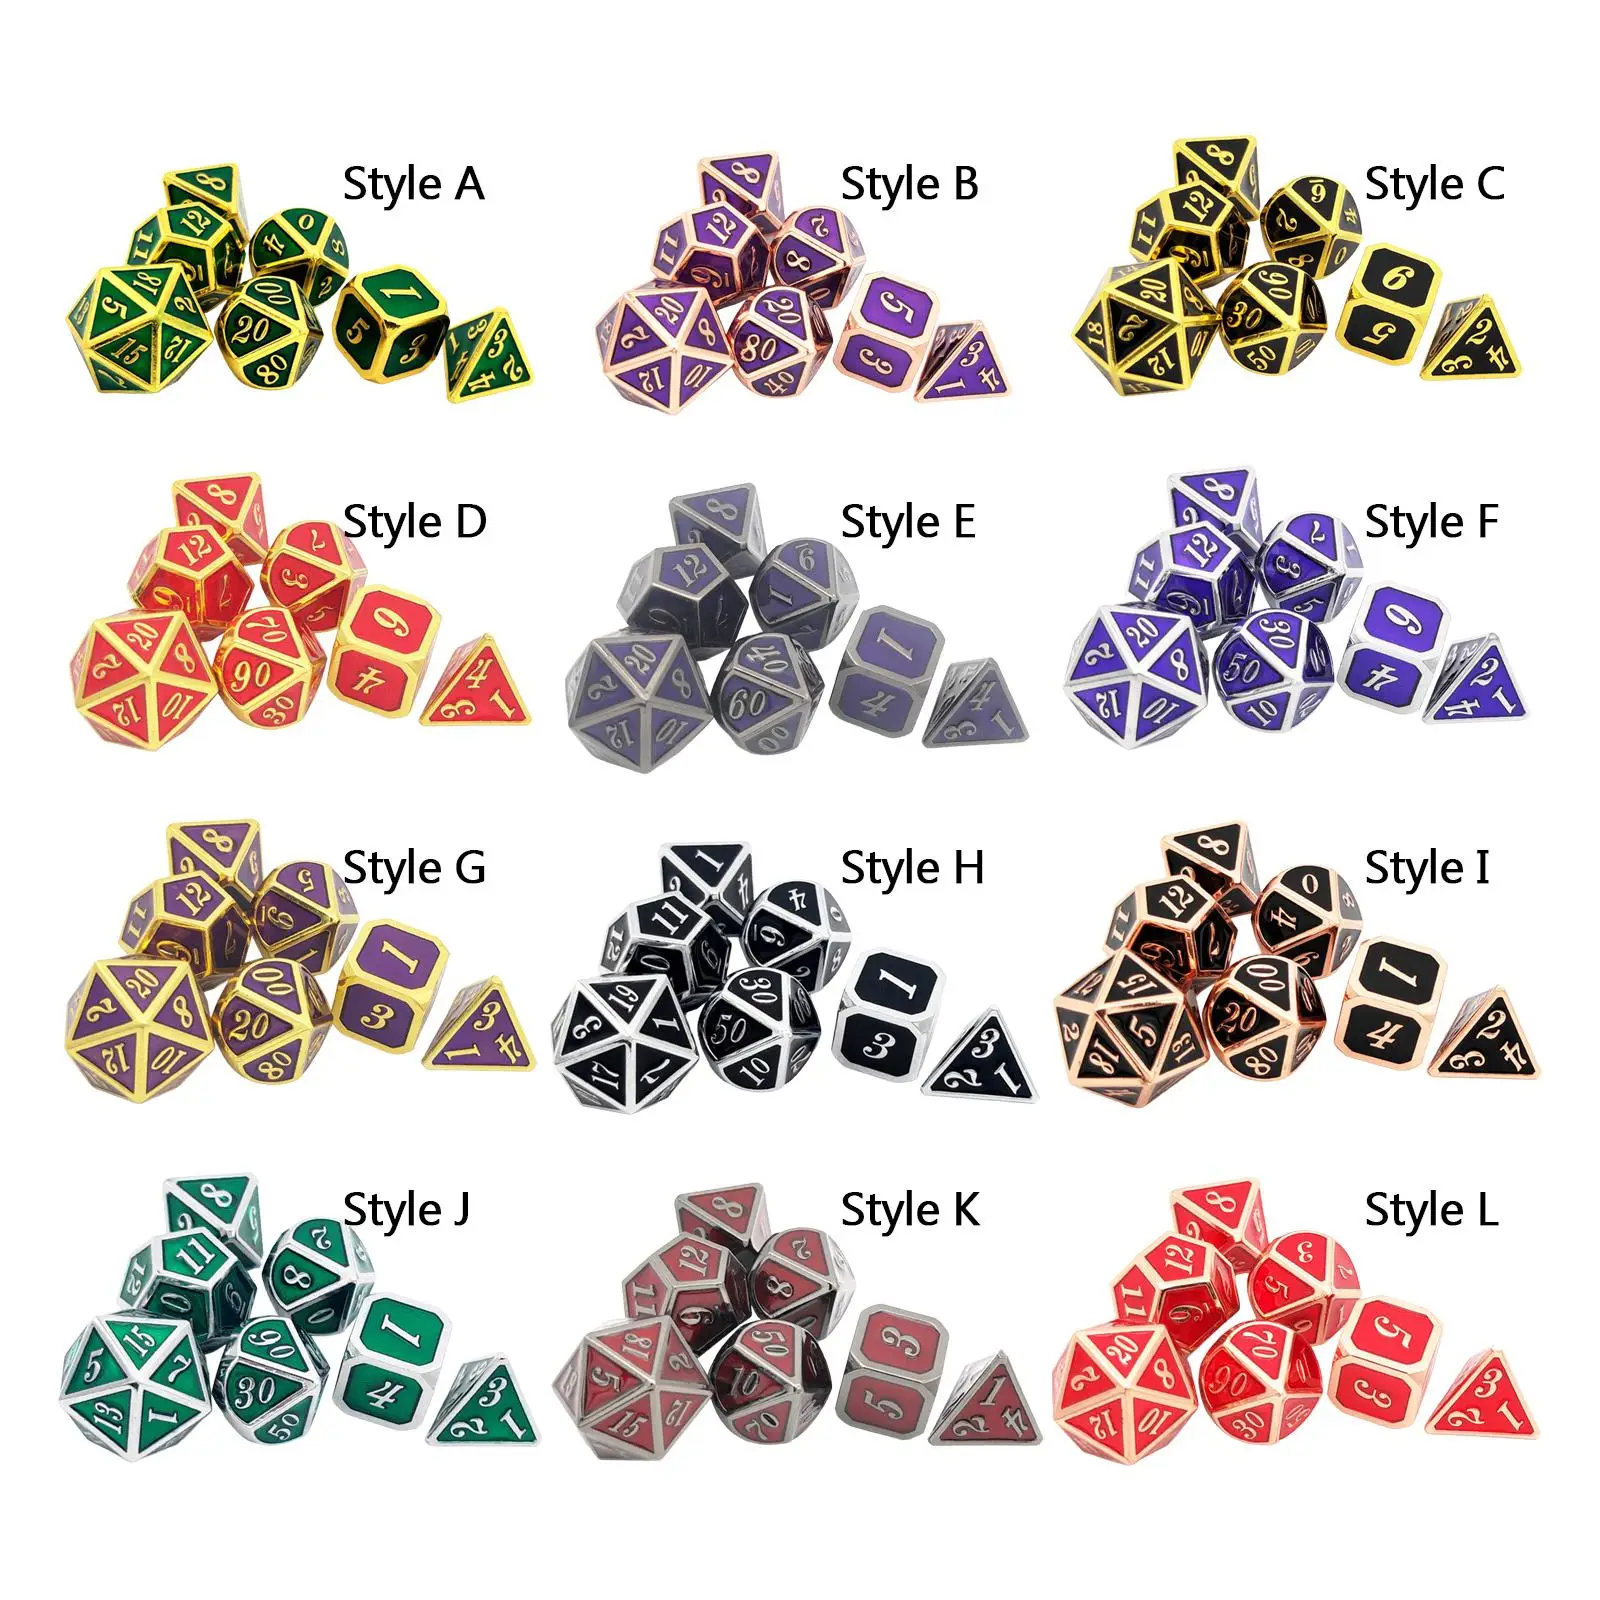 Metal Polyhedral Dice 7Pcs Set Portable Aluminum Alloy for Teaching Projects